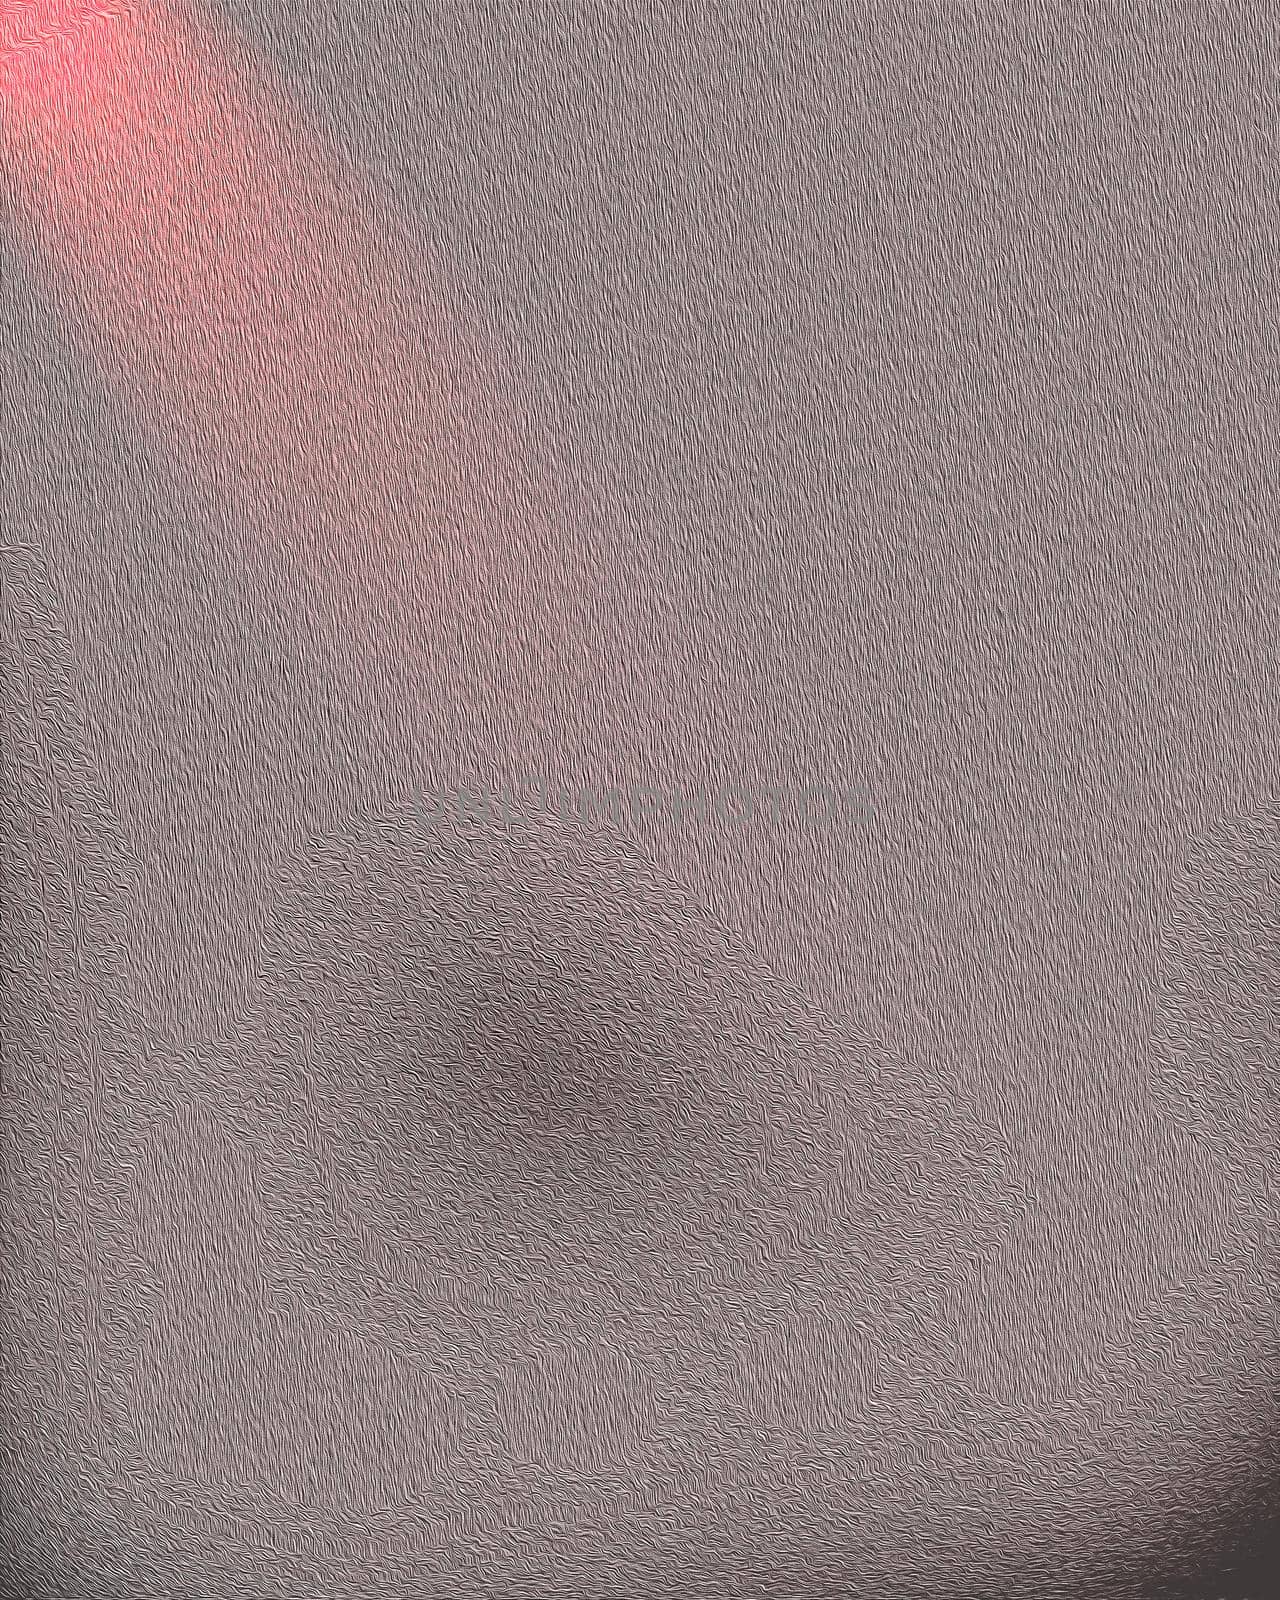 Abstract Textured fur surface  red light leak by imagesbykenny